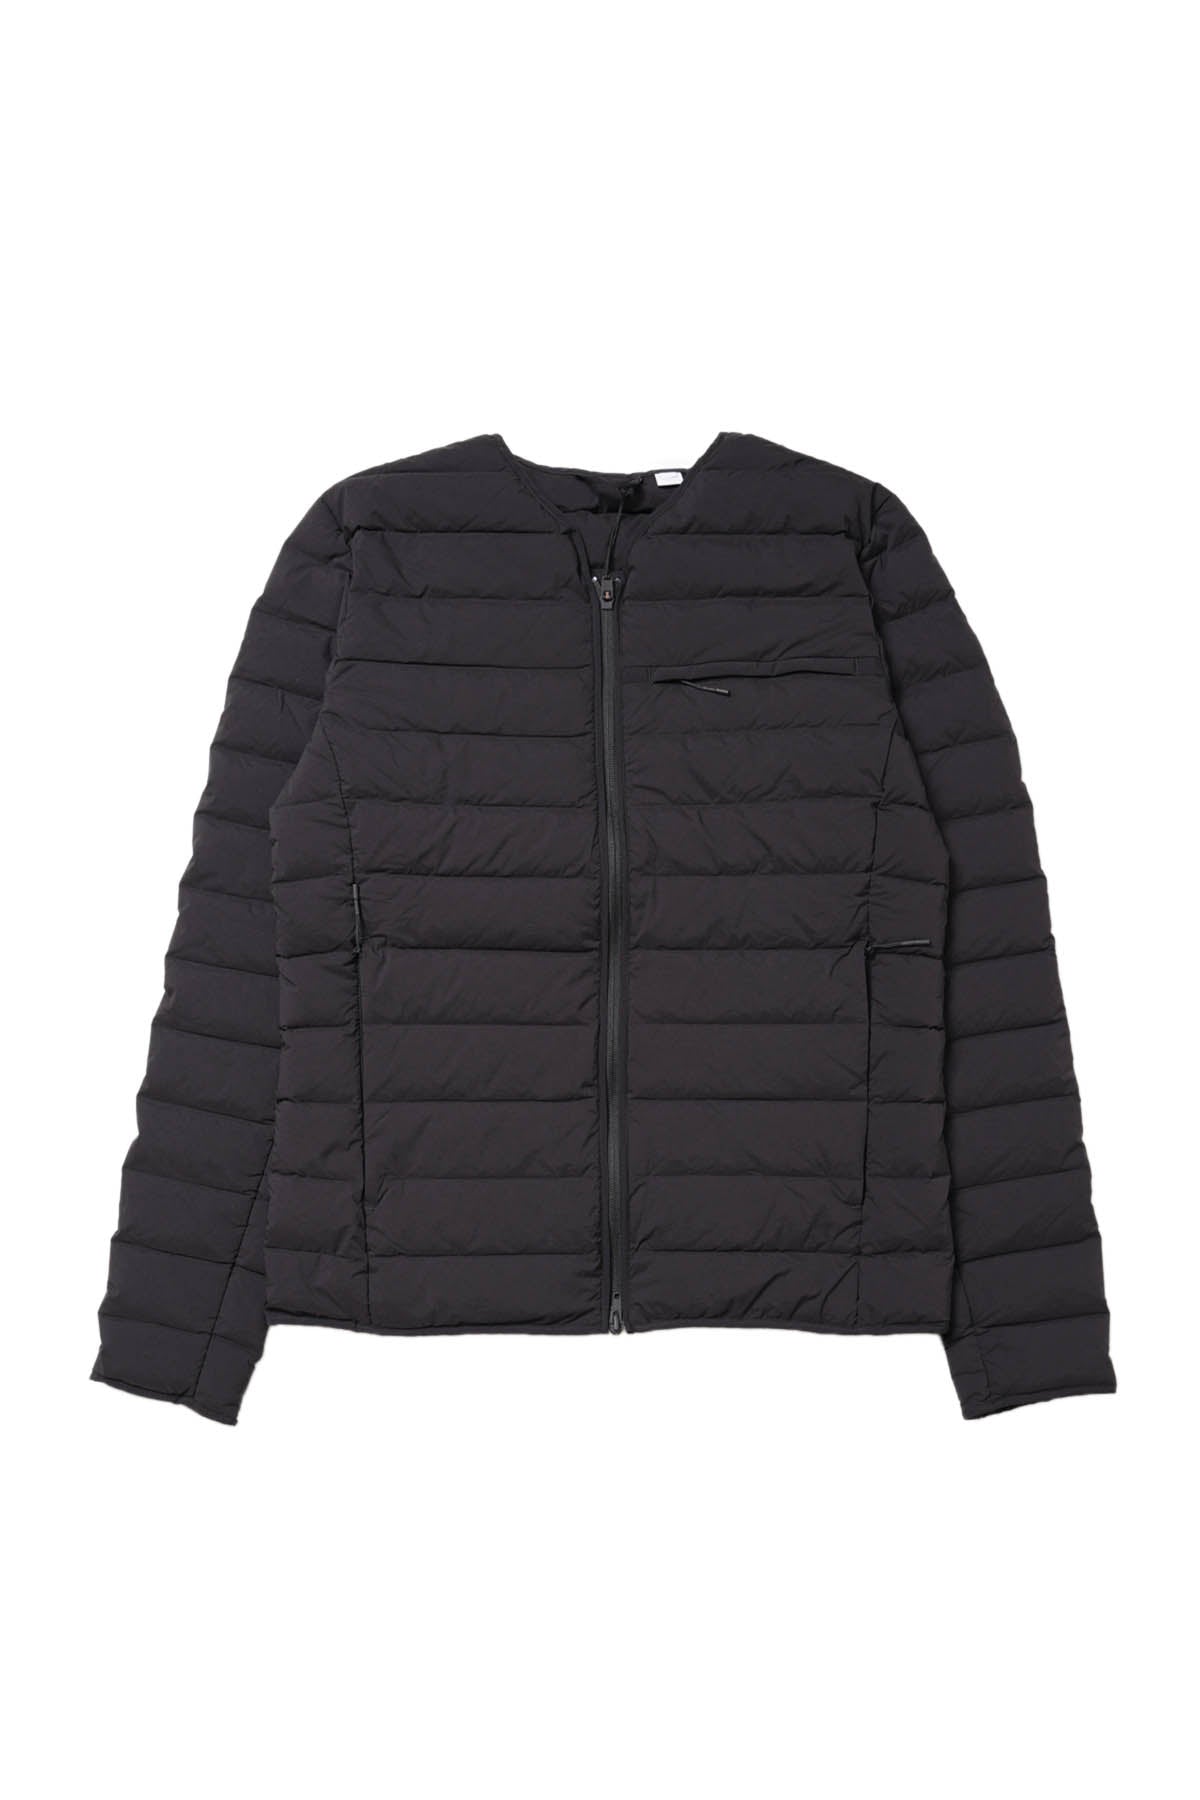 CLASSIC LIGHT DOWN LINER JACKET【50%OFF】